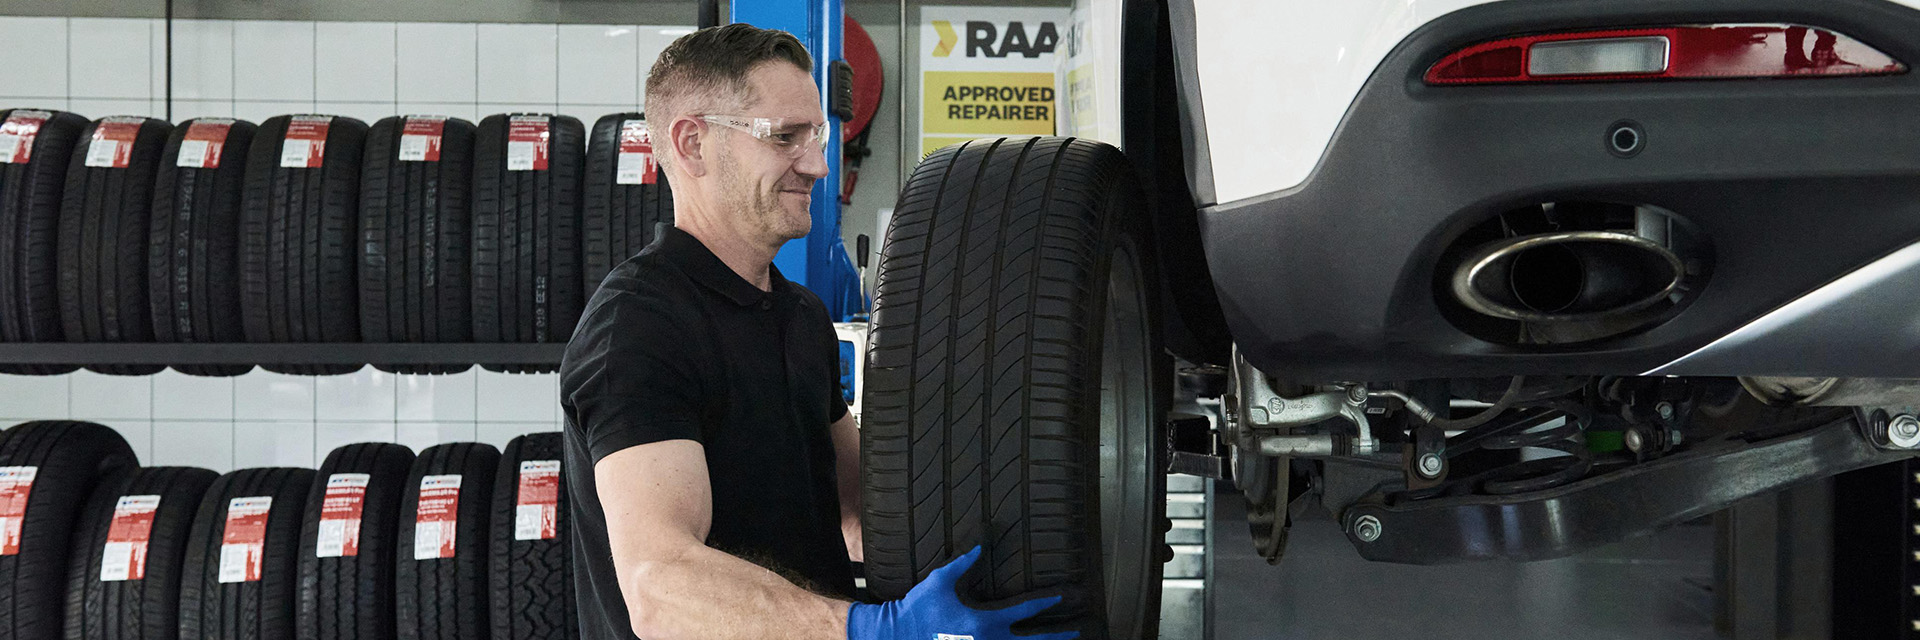 Getting tyres fitted by RAA